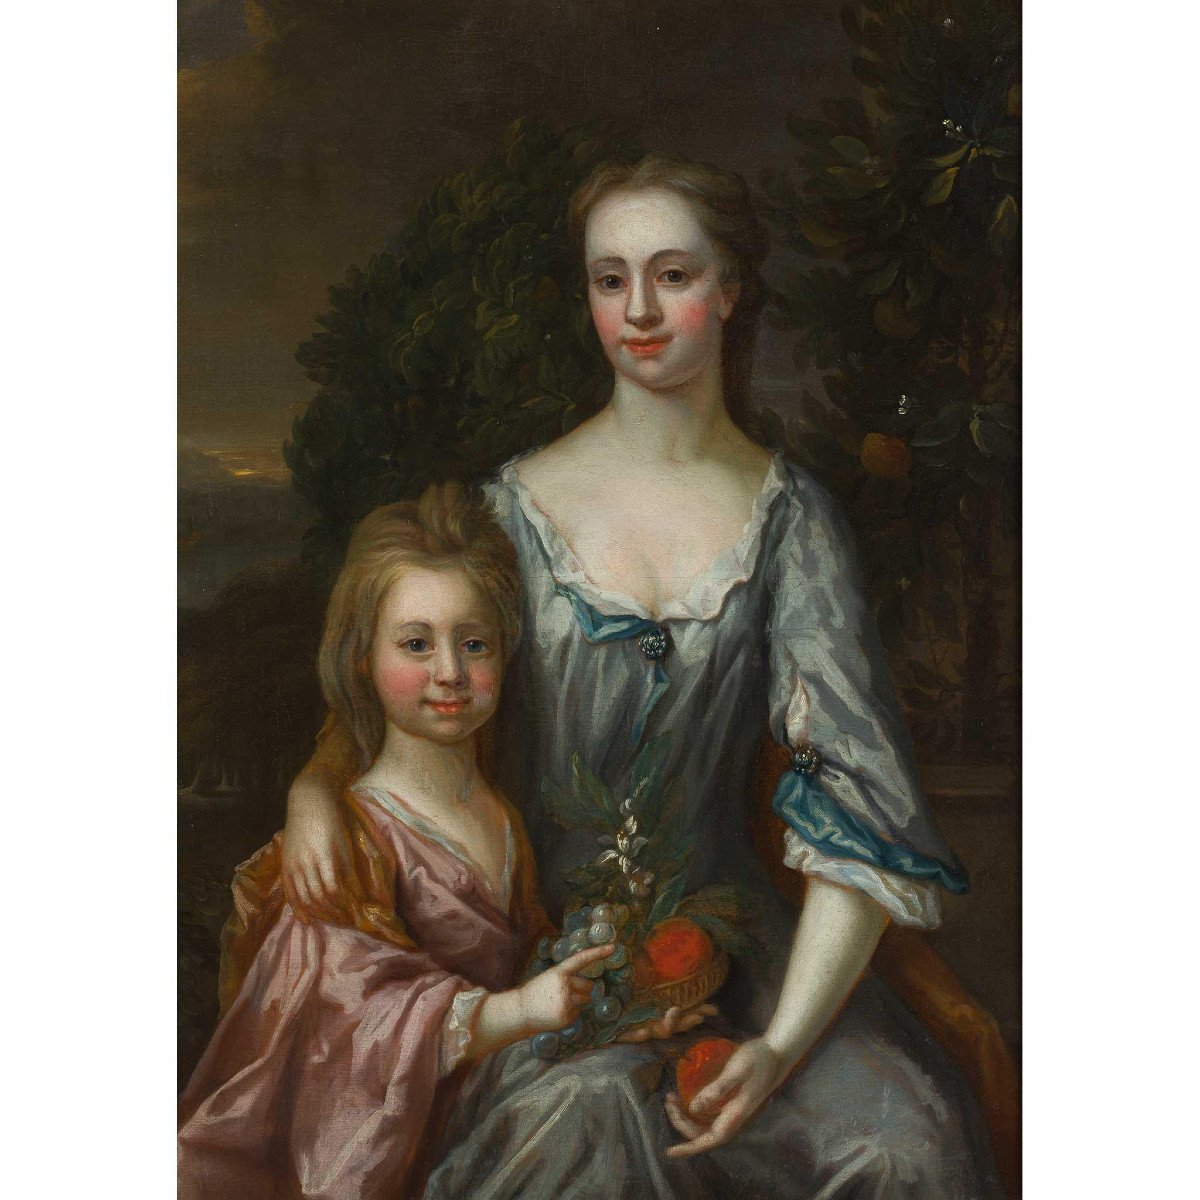 Portrait Of A Young Woman With A Girl 17th Century, Painting